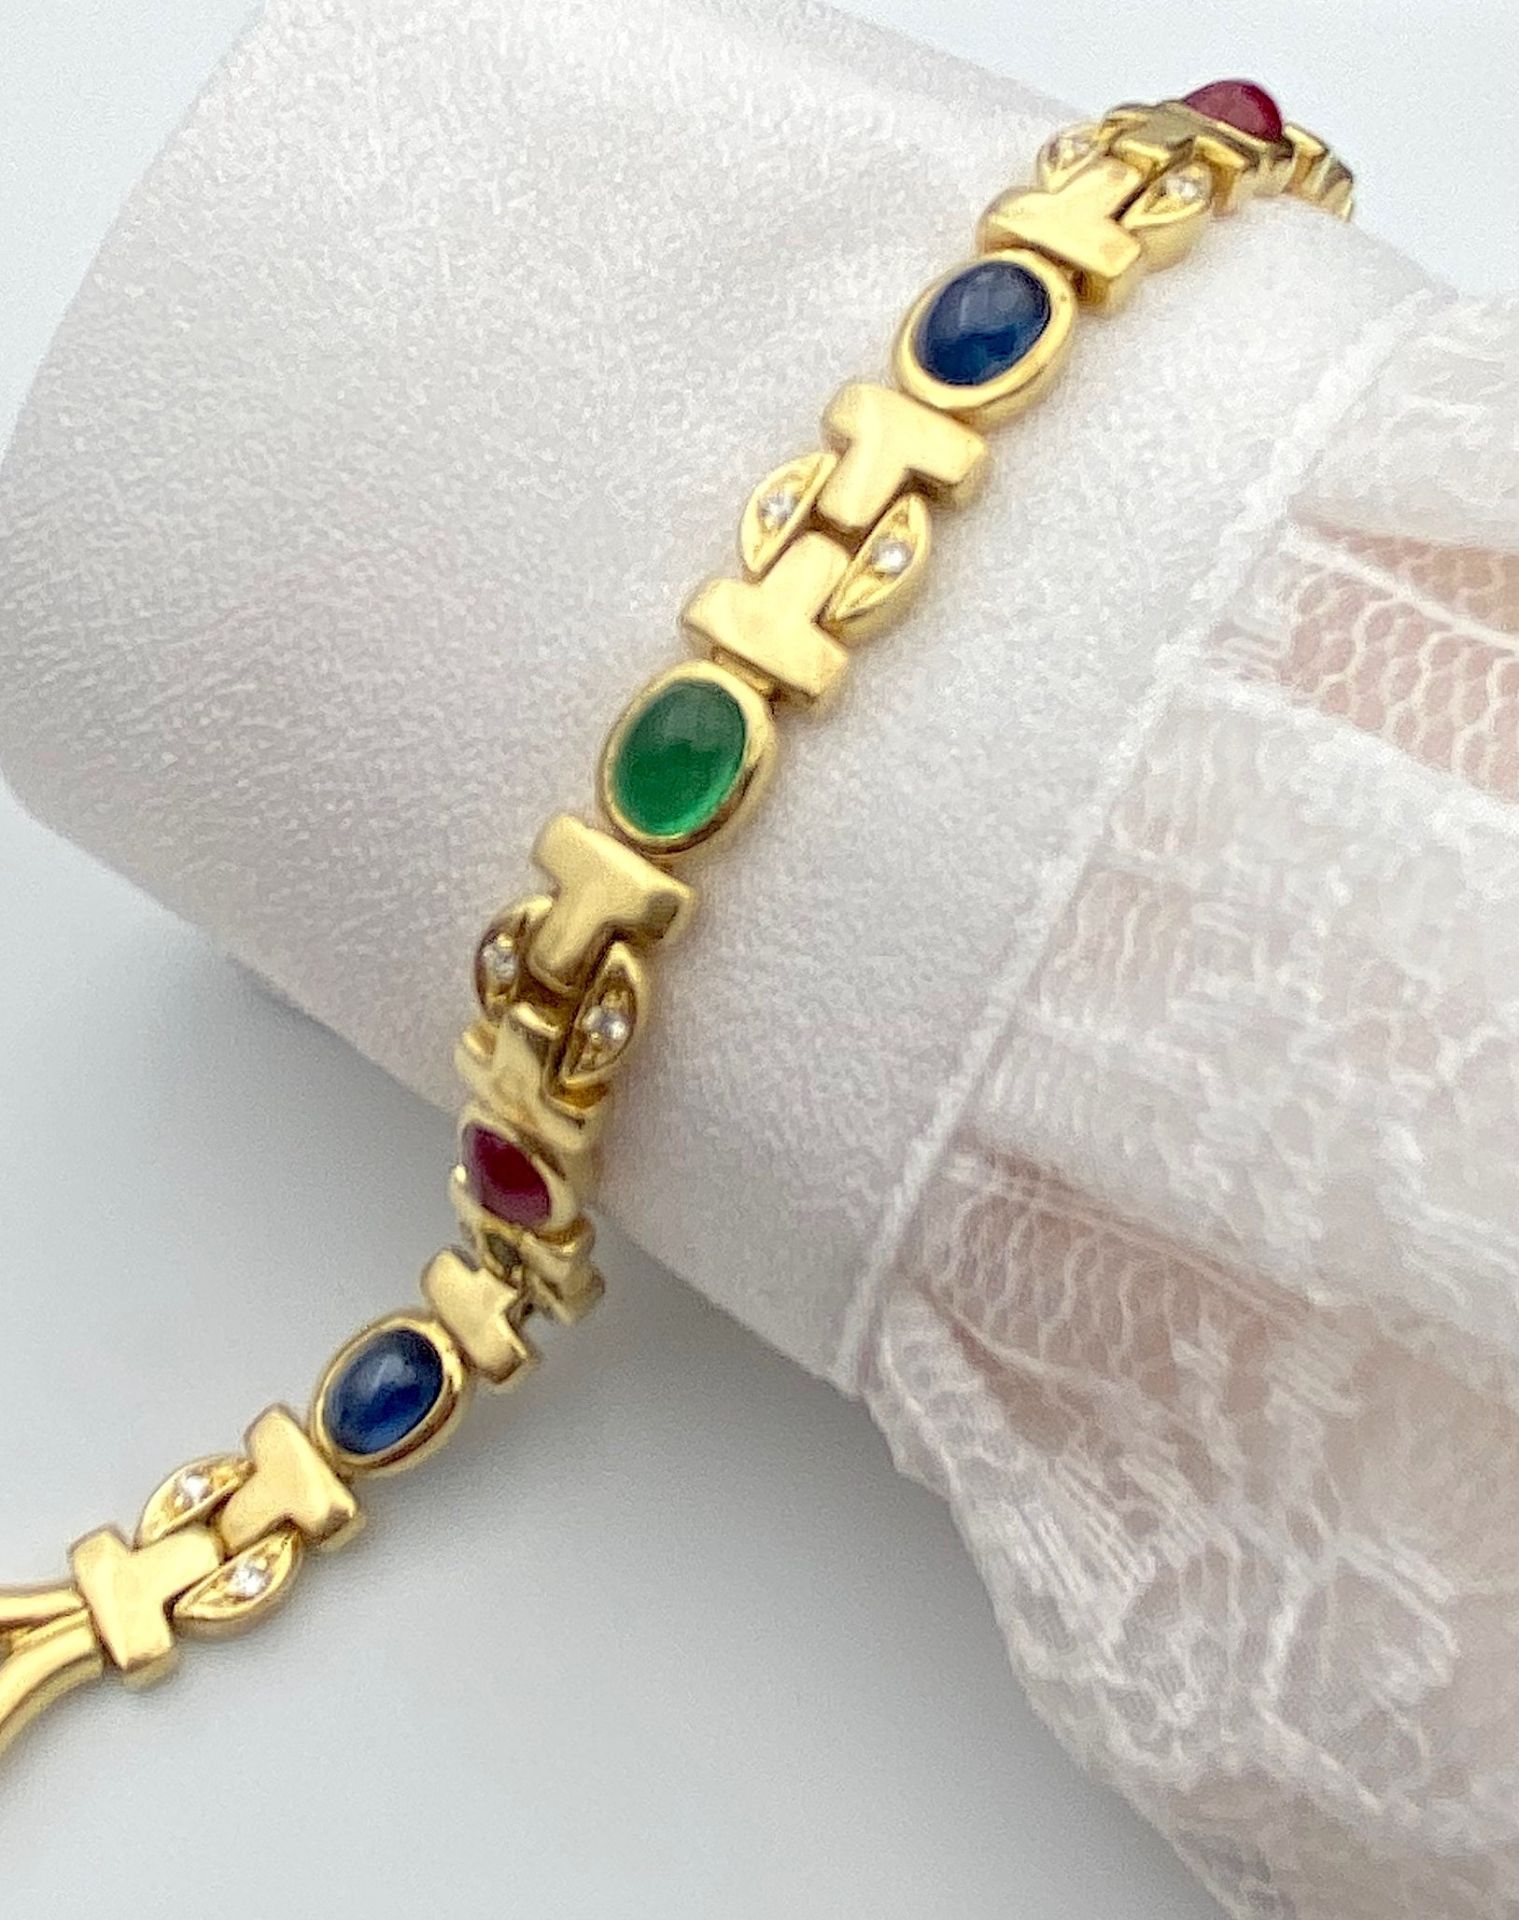 Bracelet with rubies, sapphires, emeralds and diamonds